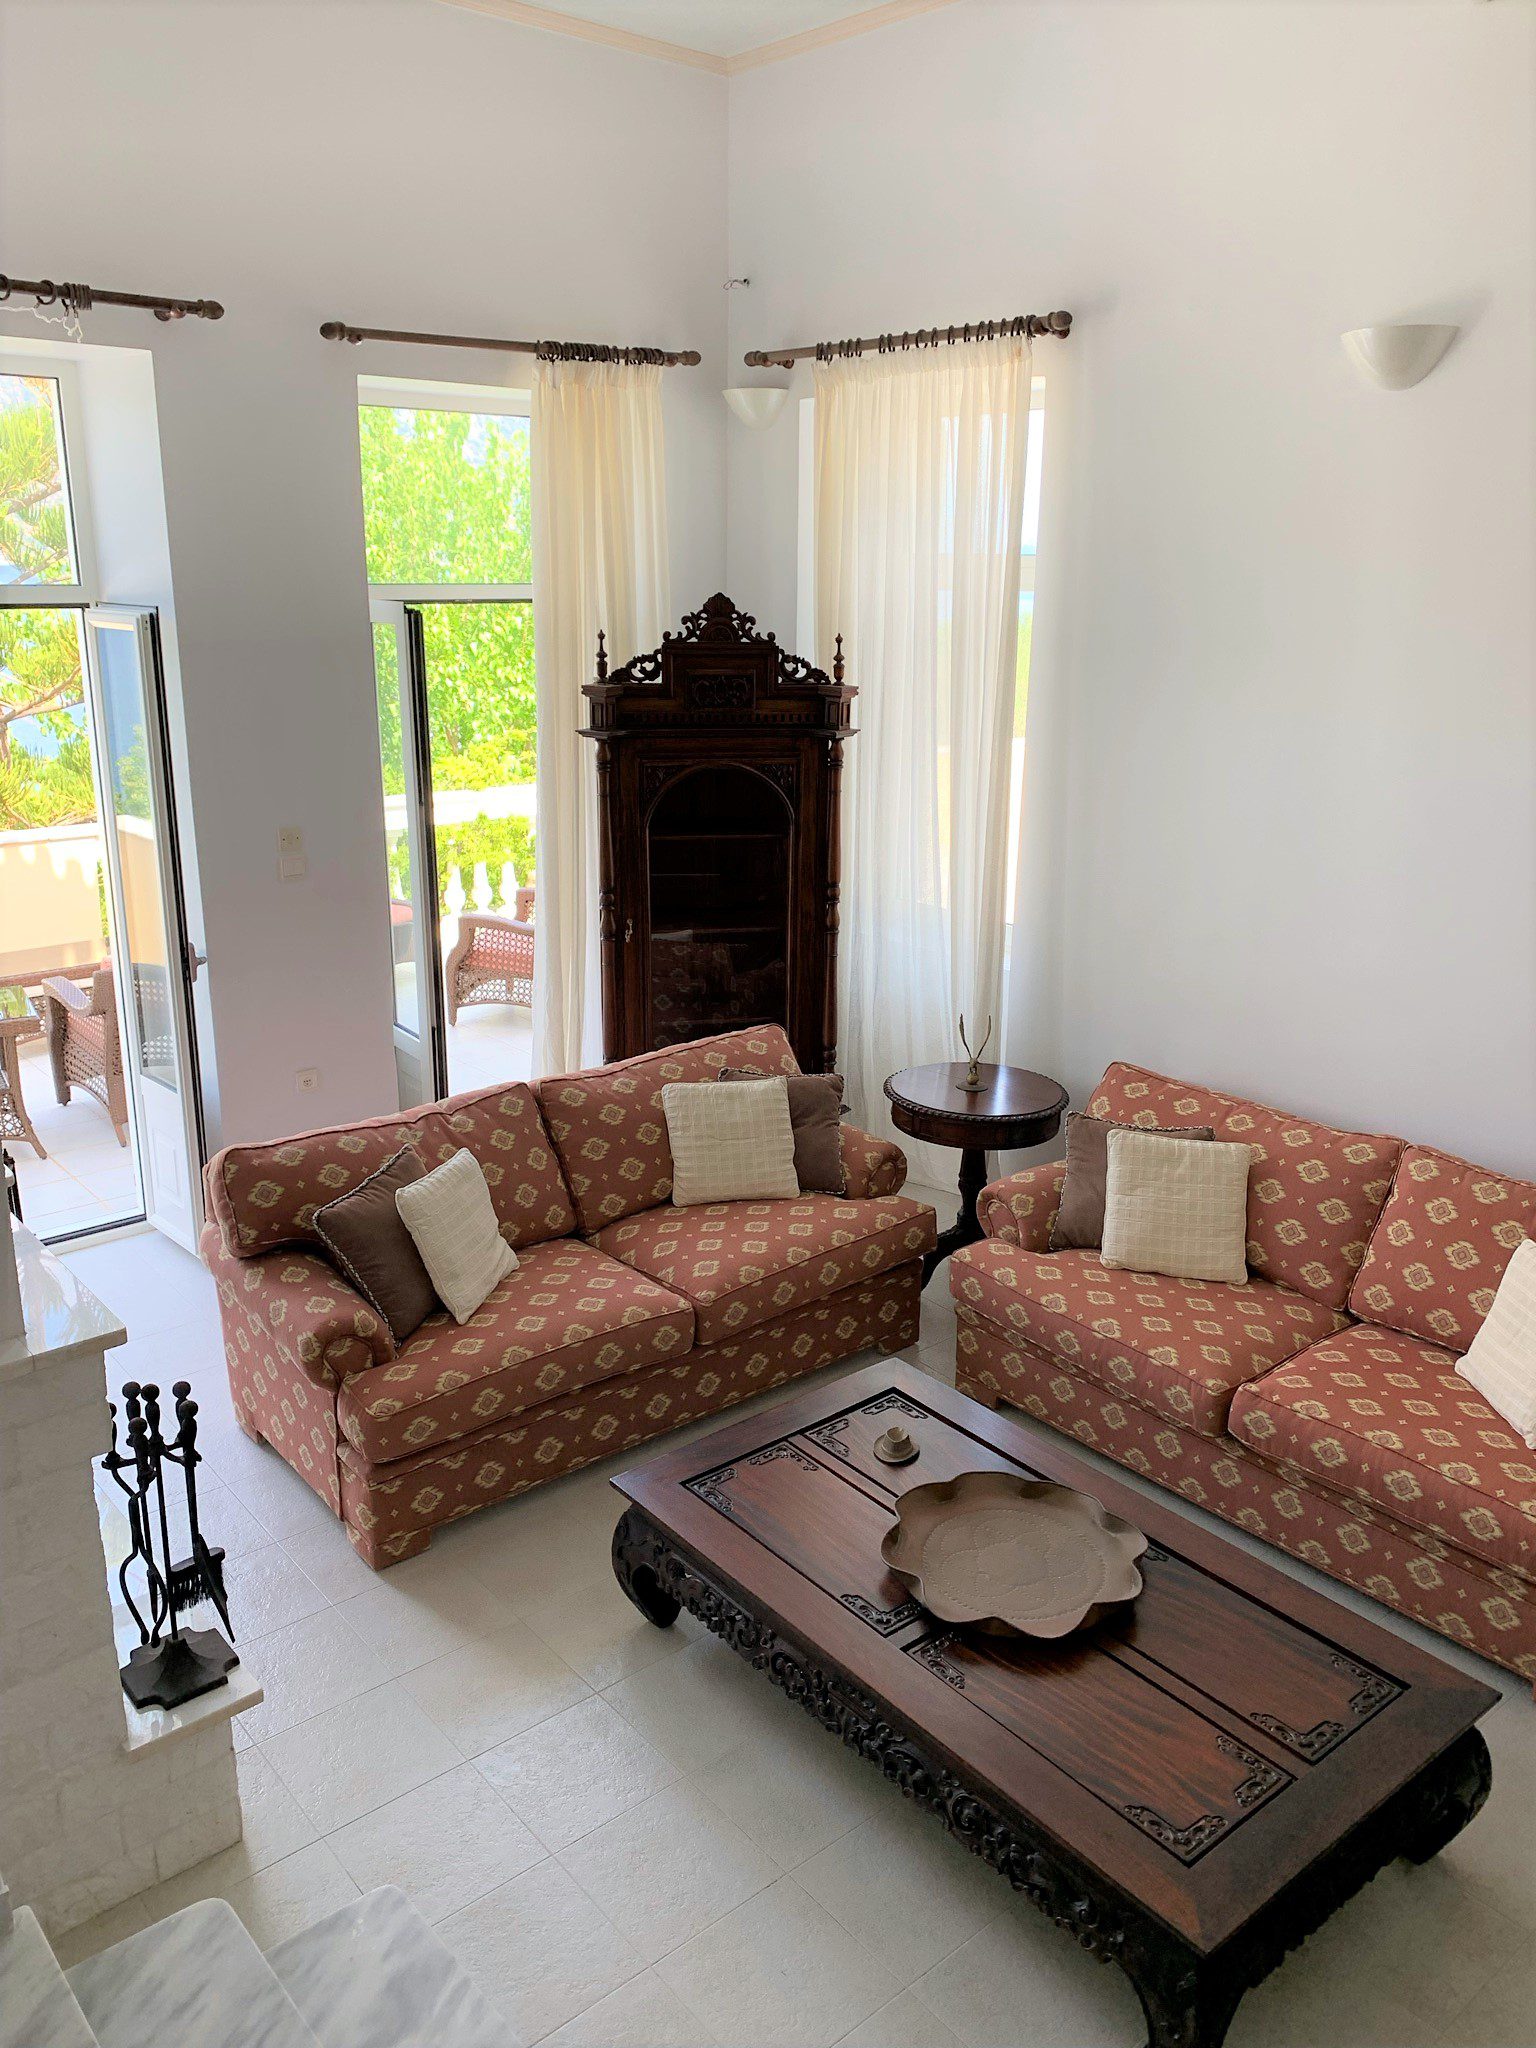 Living room of house for sale Ithaca Greece, Aetos